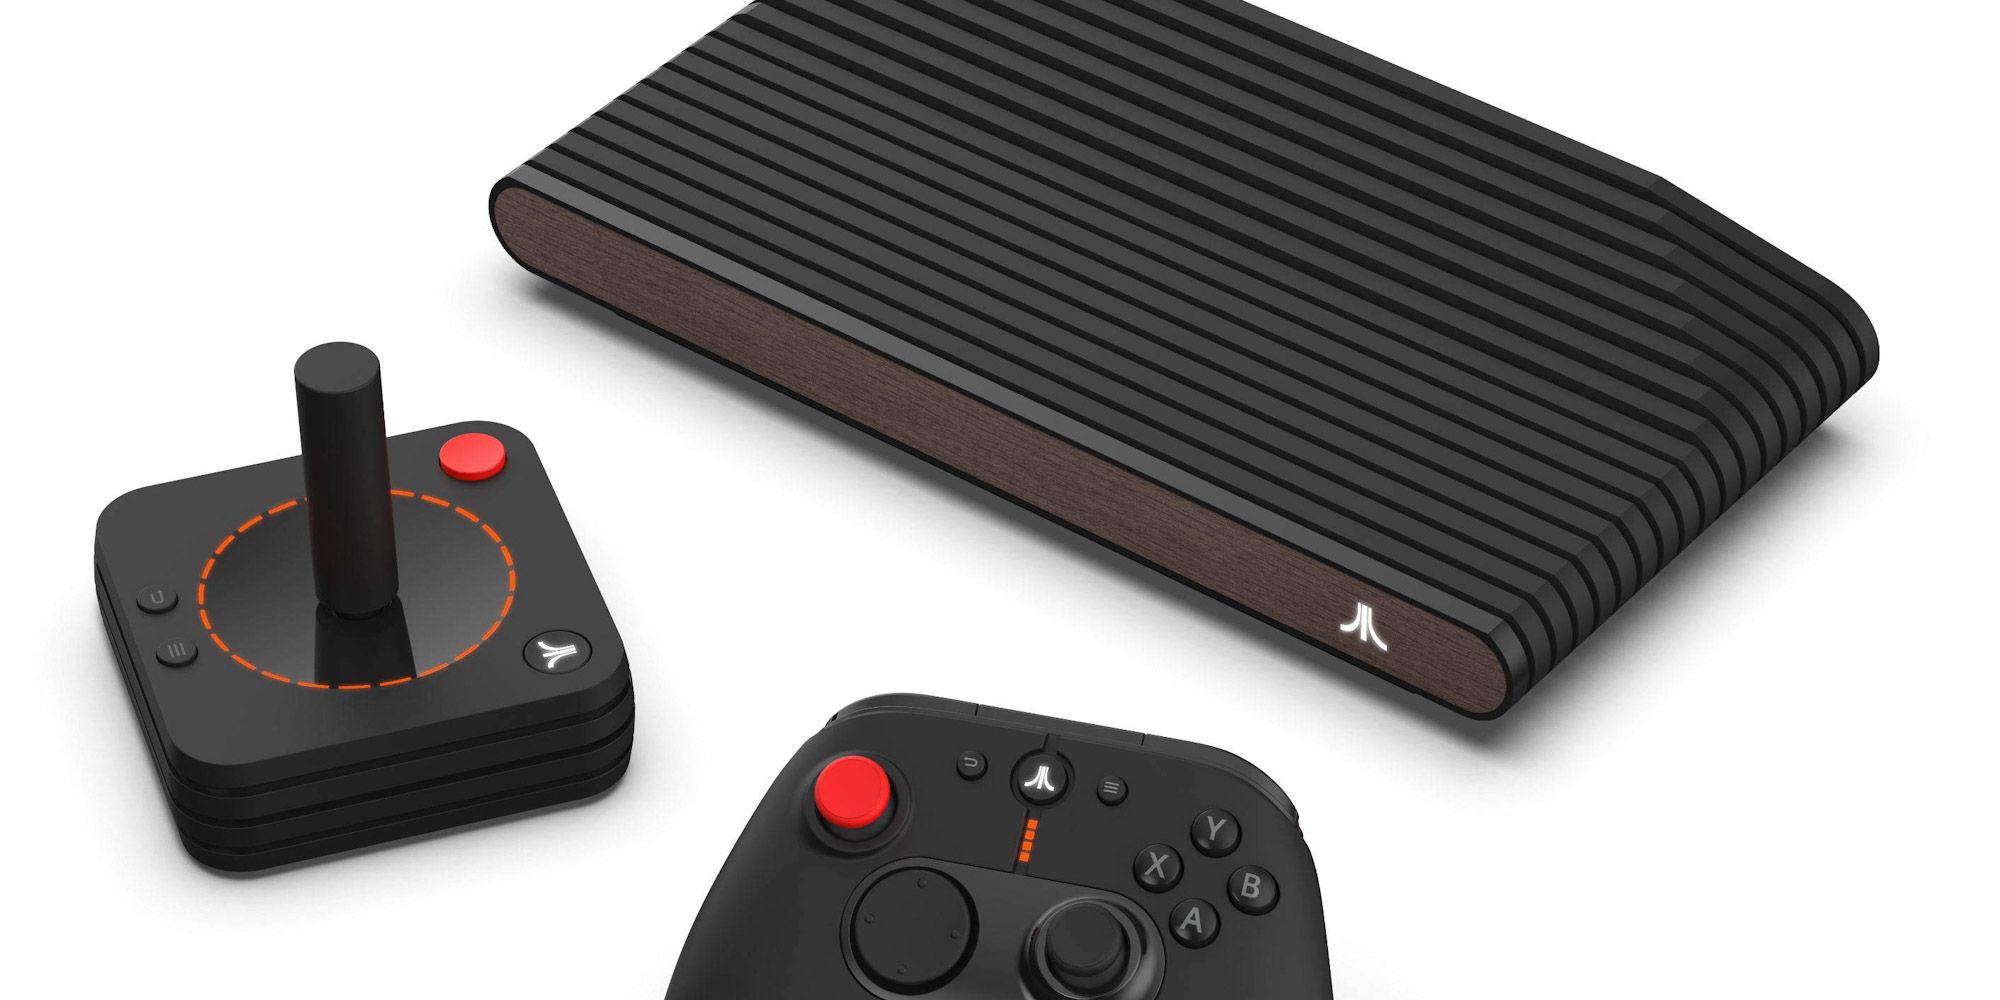 Atari VCS with classic and modern controller